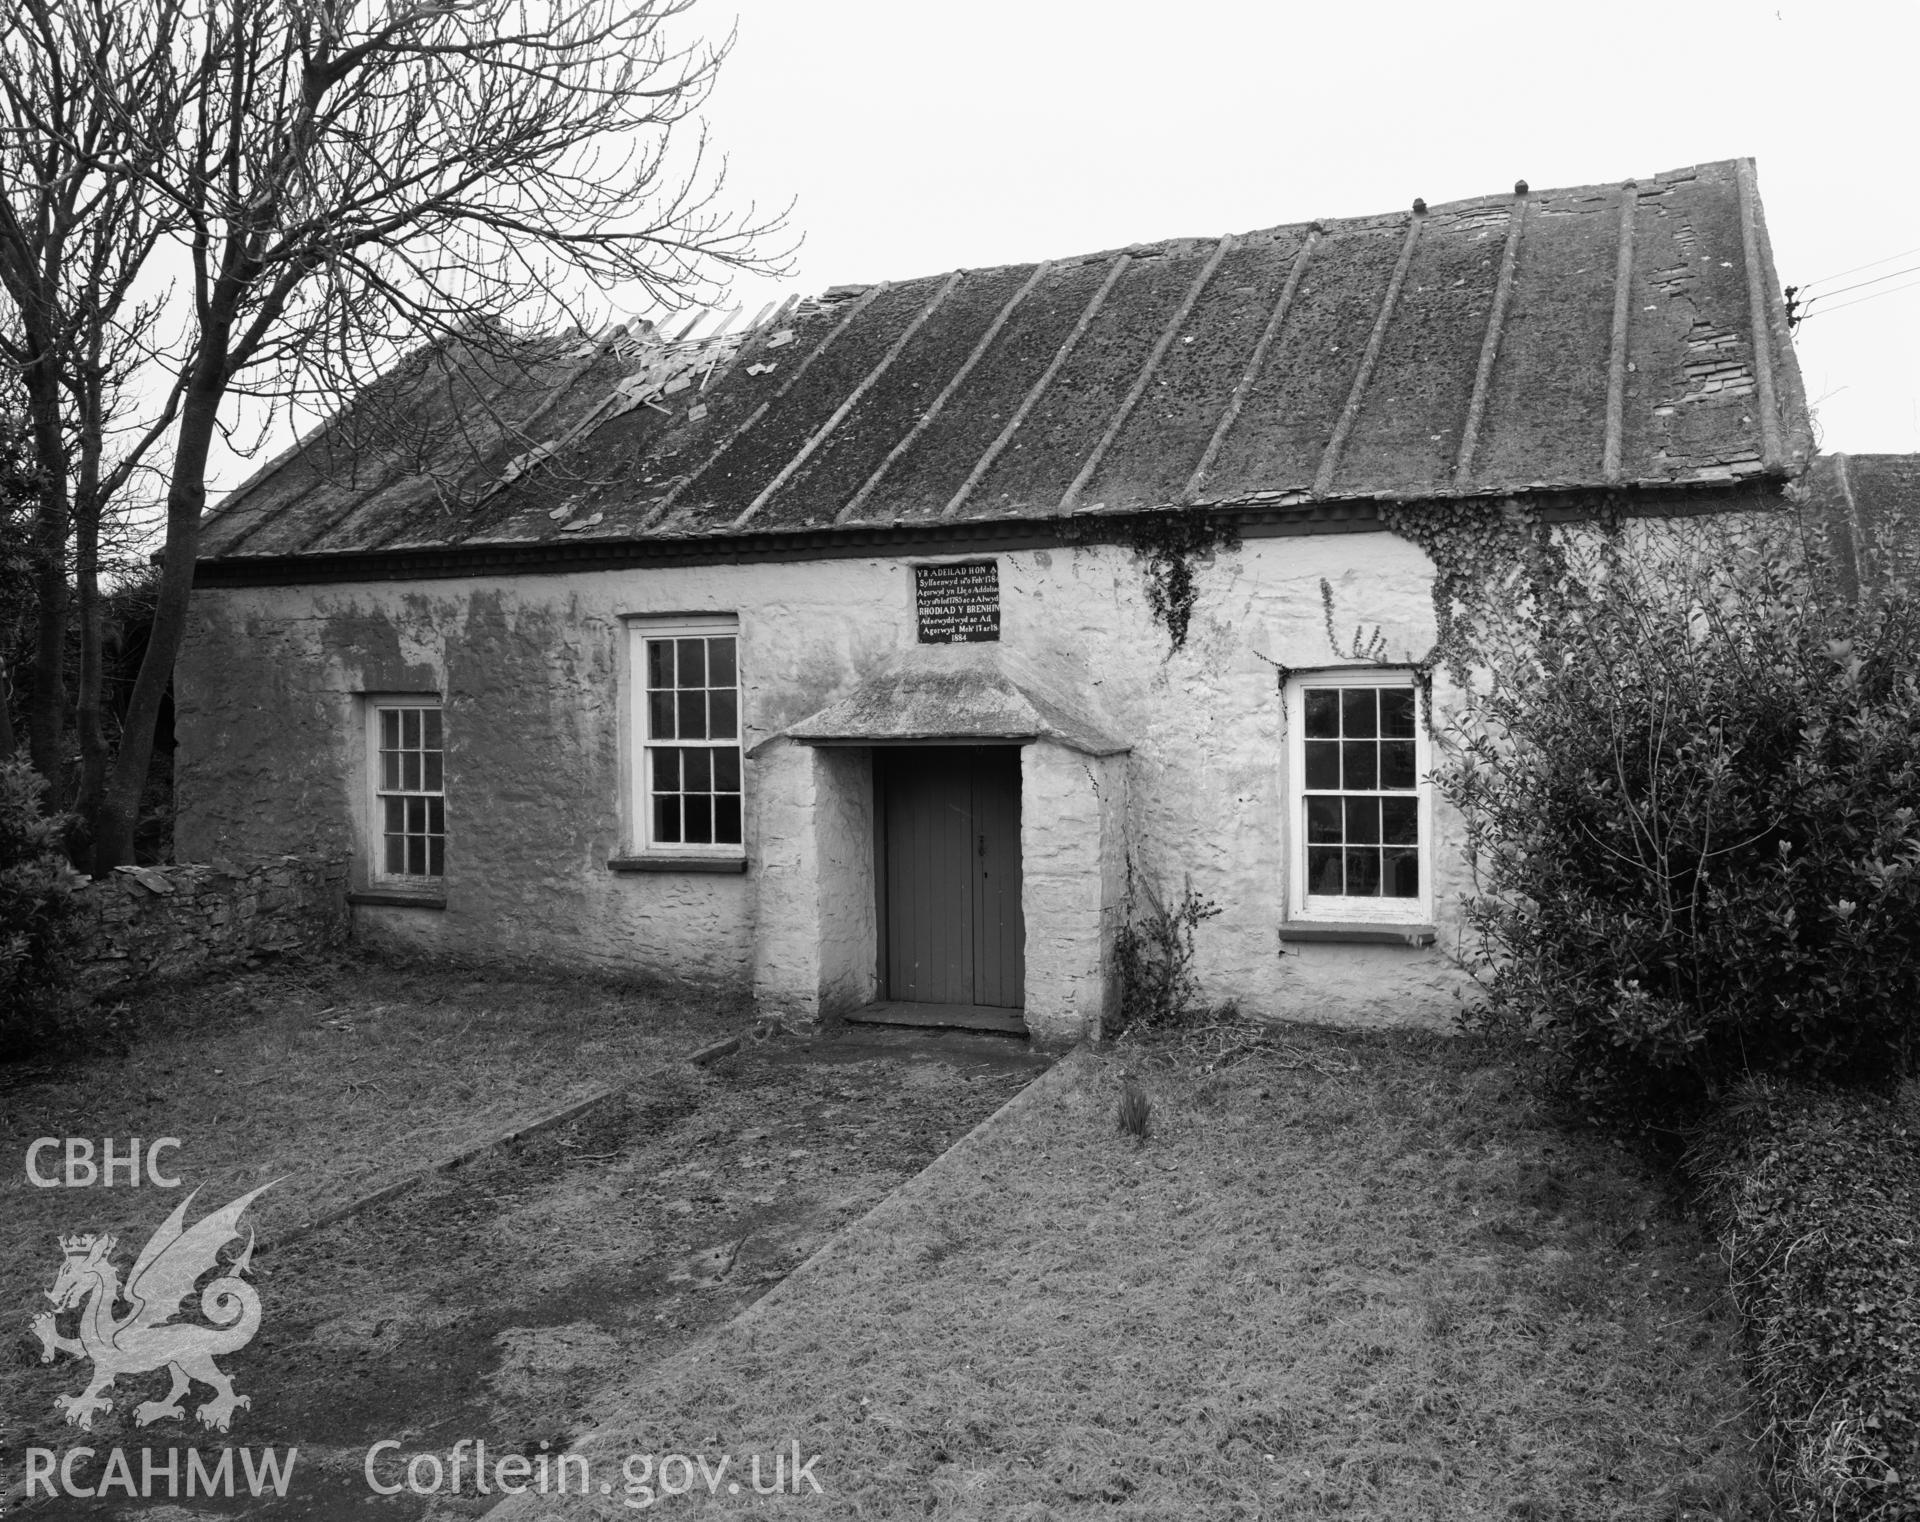 Black and white photo showing exterior view of Rhodiad Congregational Chapel, produced by Iain Wright 1993.